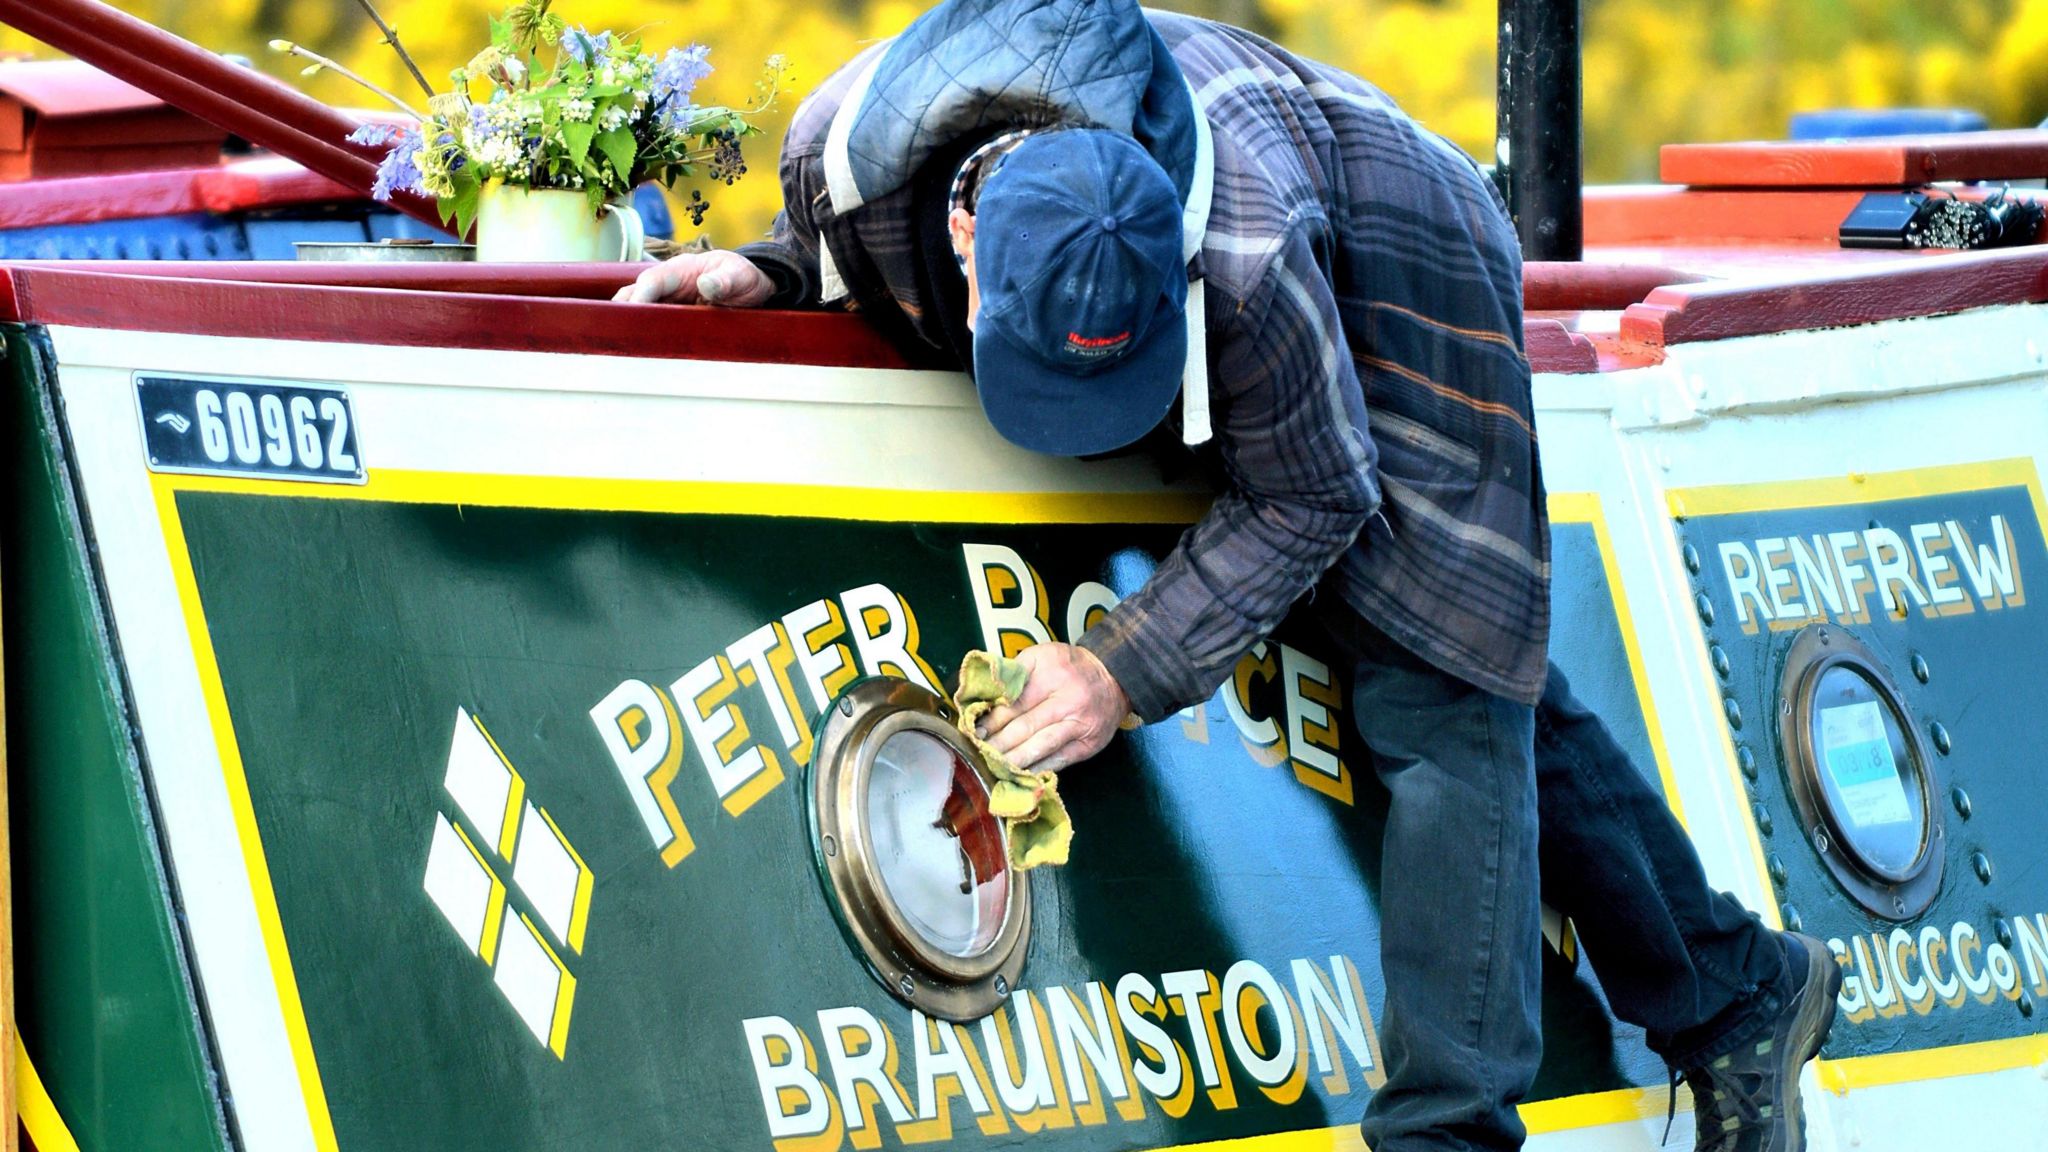 Man cleaning a green narrowboat with a yellow rag